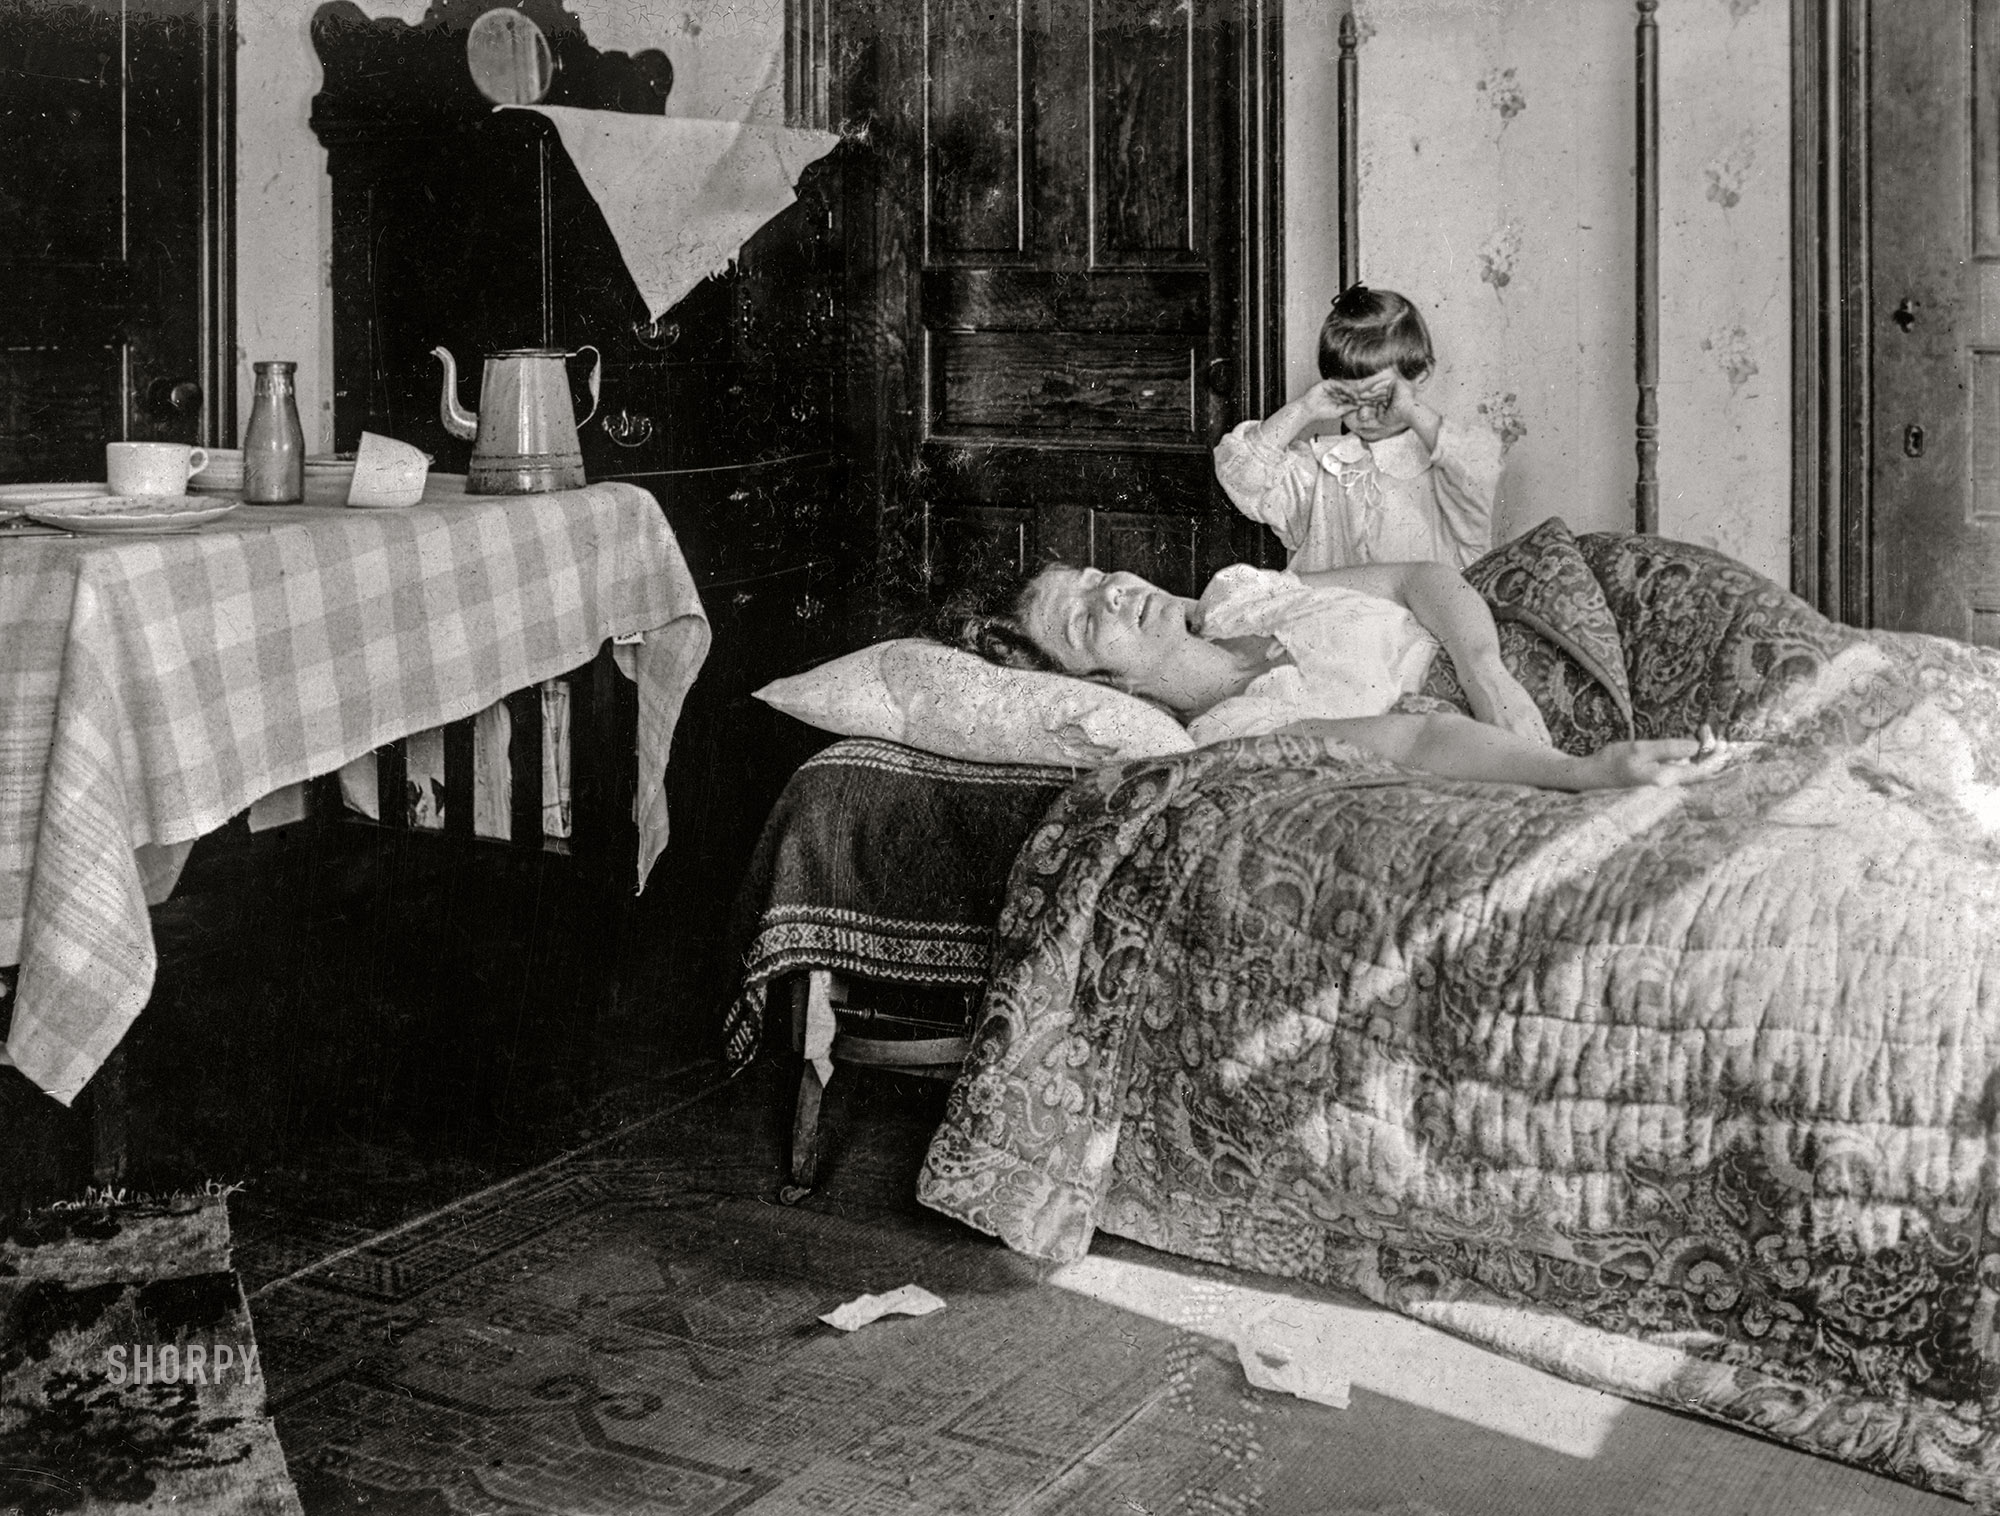 November 1918. "Her sister had not seen Mrs. Brown for almost a week, and with Mr. Brown a soldier in France, she became so worried she telephoned the Red Cross Home Service, which arrived just in time to rescue Mrs. Brown from the clutches of influenza." American National Red Cross glass negative. View full size.
